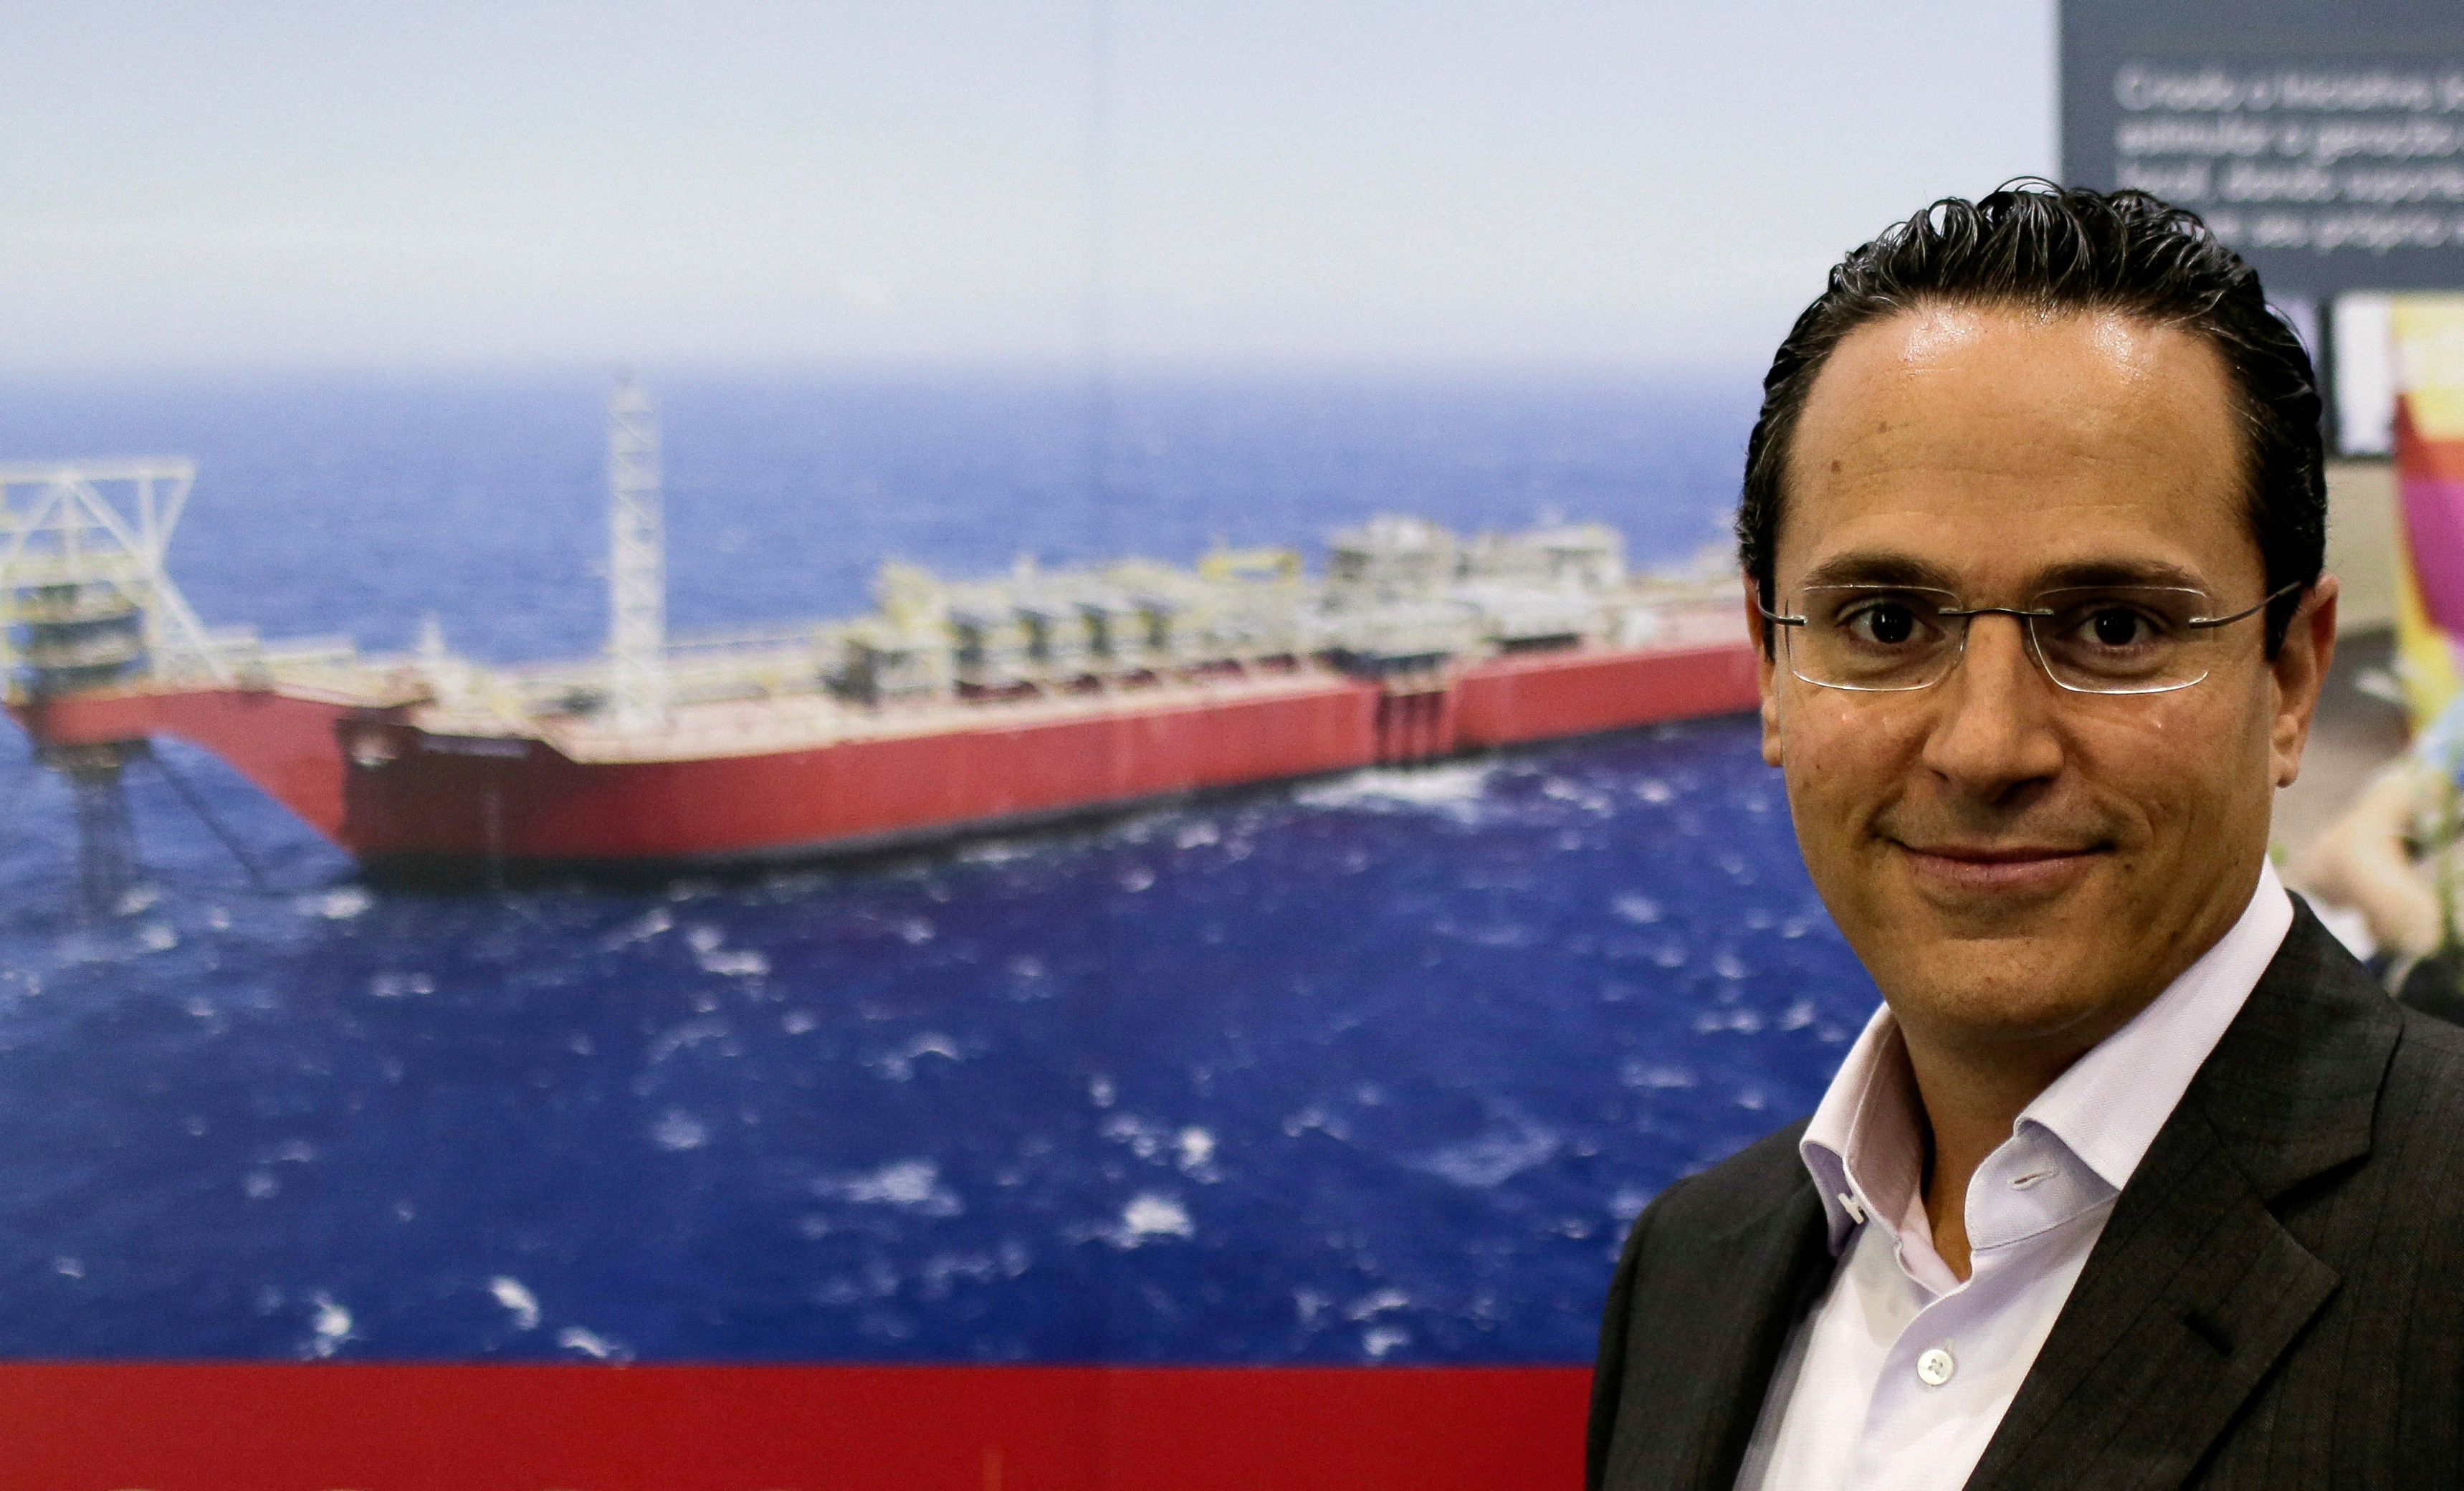 Sawan, Executive Vice President for Shell's deepwater division, poses for a picture before an interview for Reuters during an oil conference in Rio de Janeiro